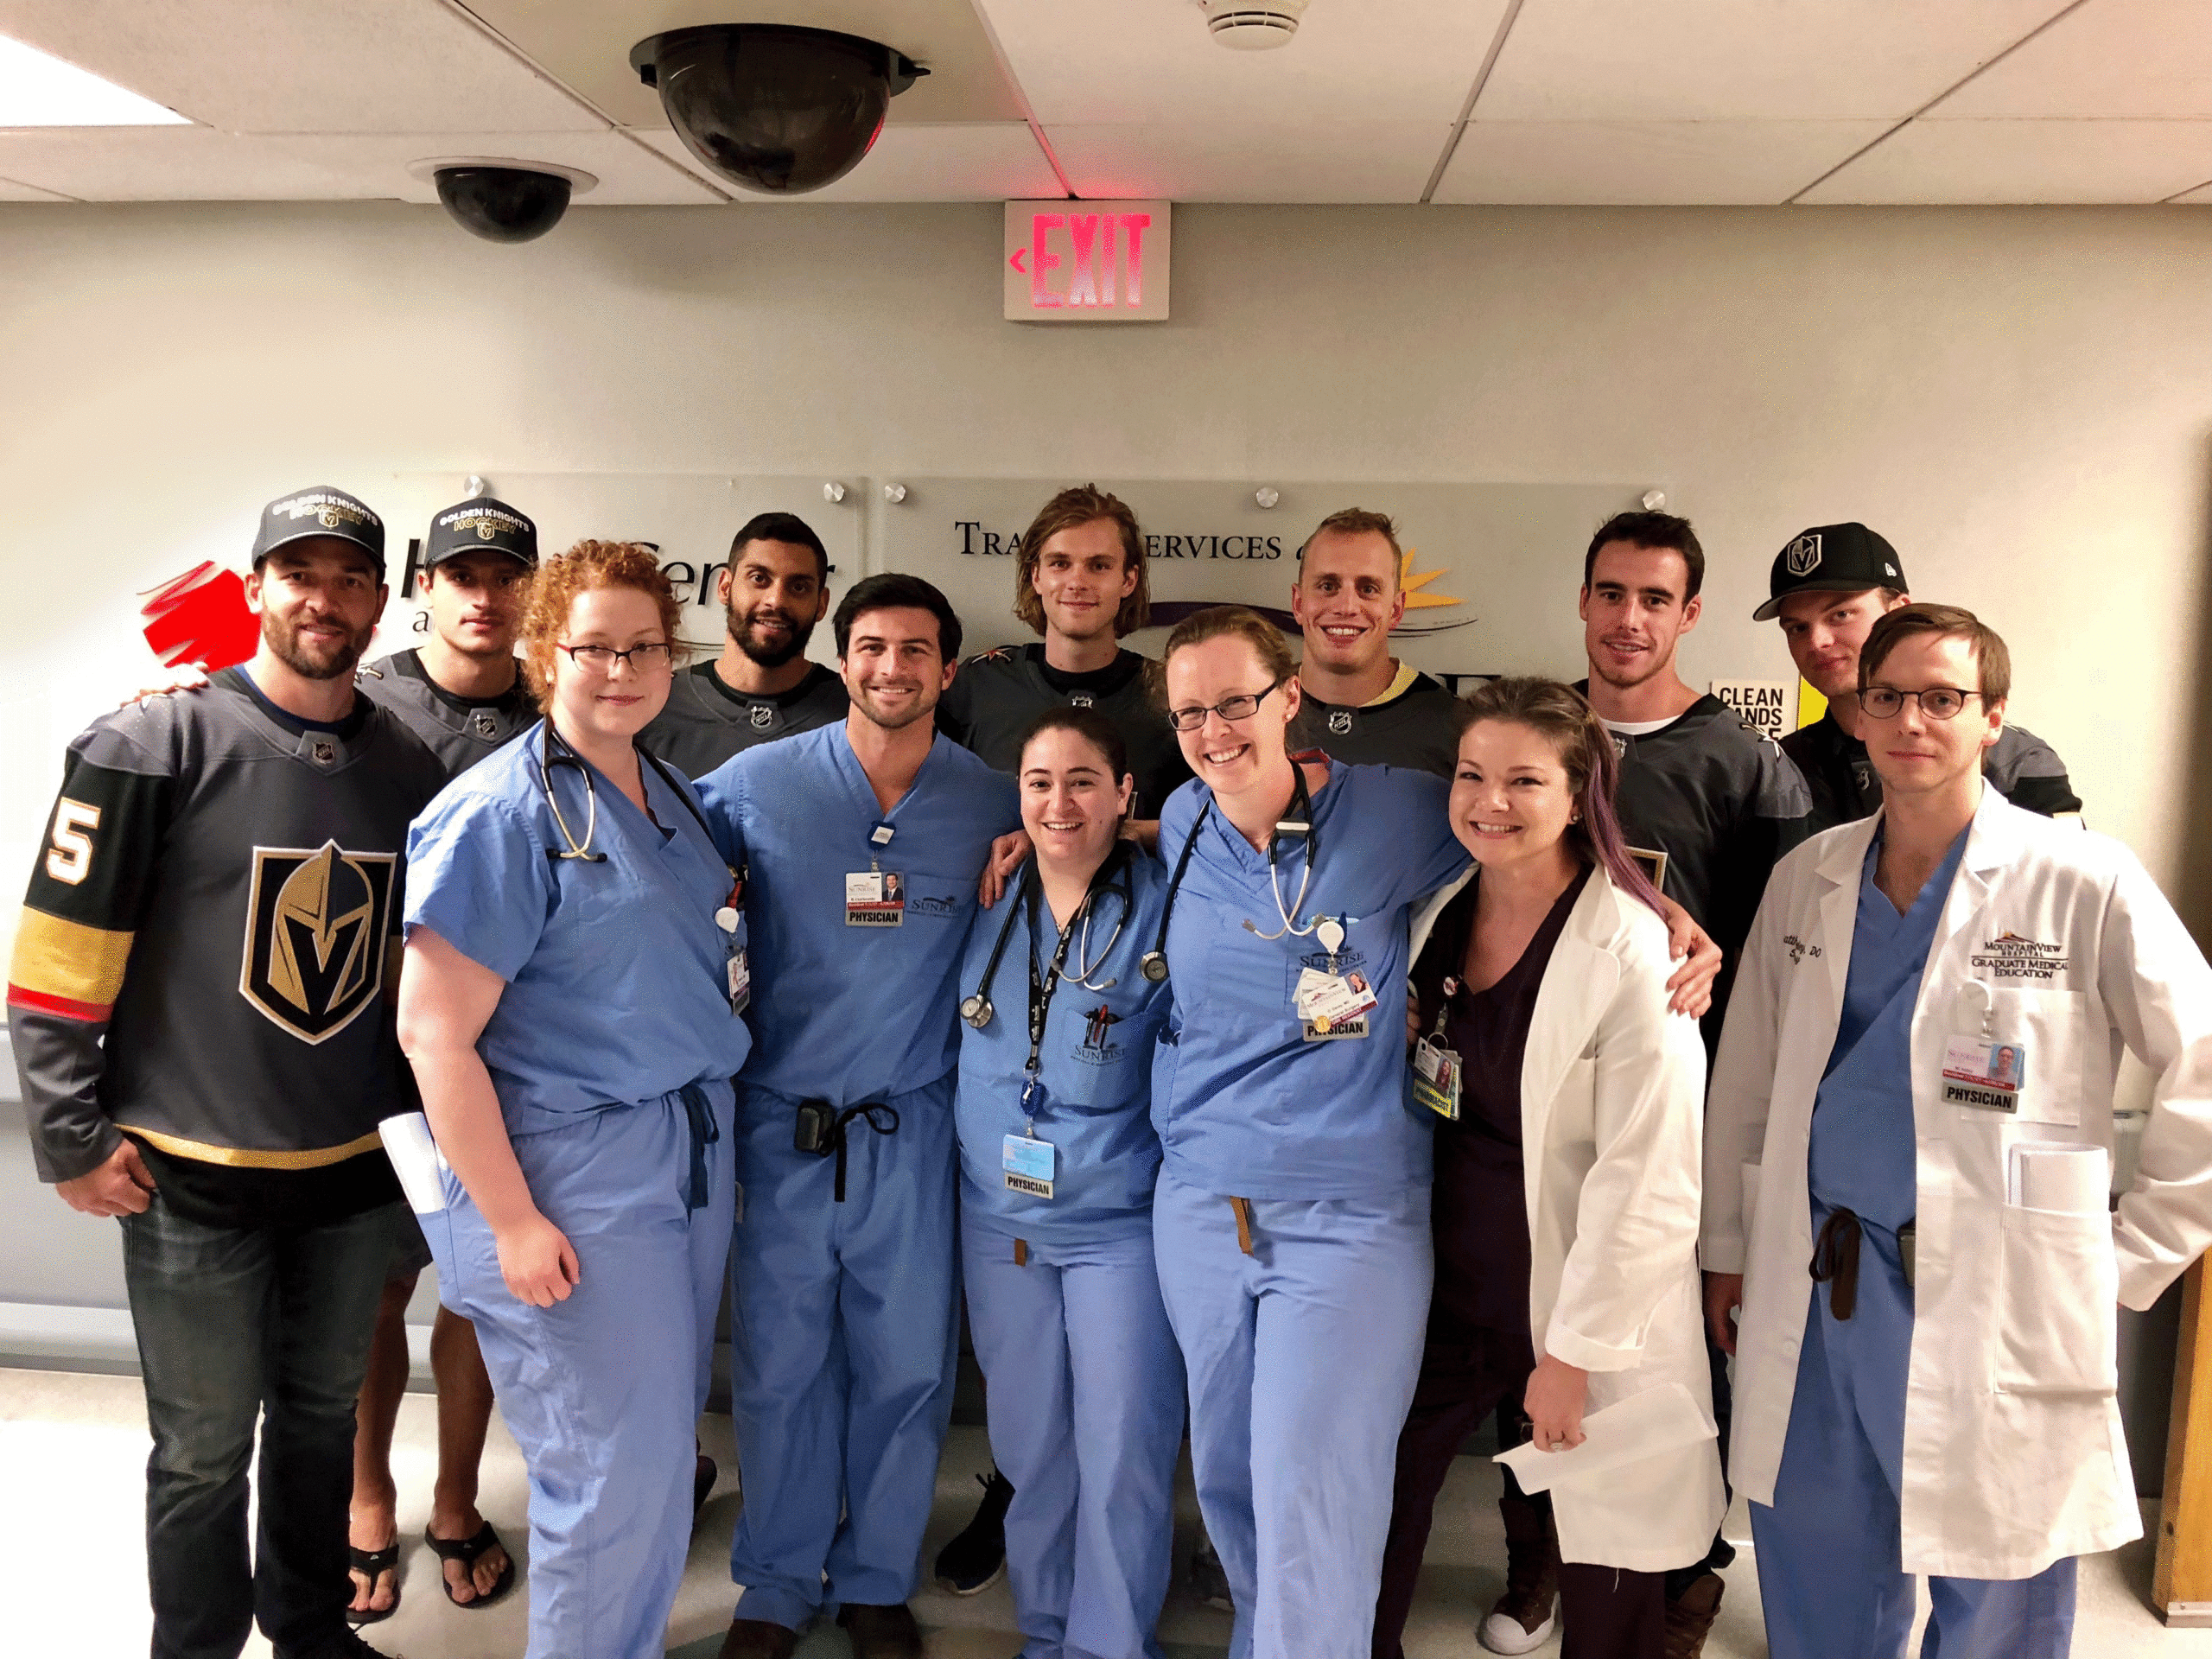 Hospital caregivers posing with members of the Vegas Golden Knights hockey team